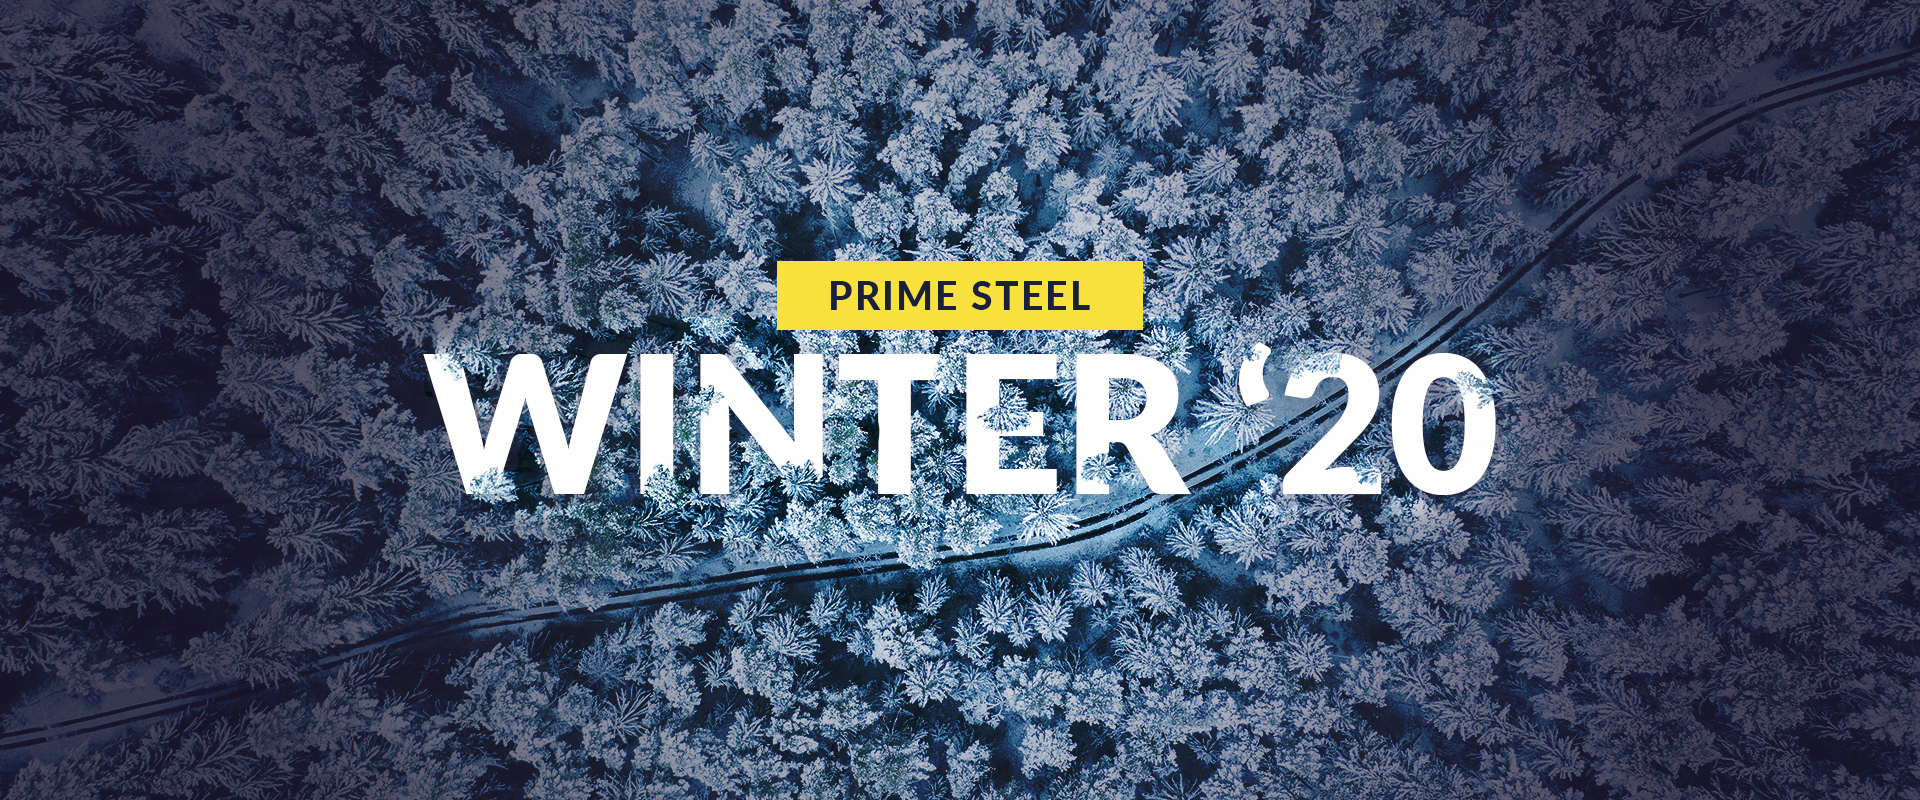 Antavo’s Prime Steel Winter Product Release is all about the enterprise-grade offer management: why it is important, what offer types are available, and how to create a synergy.